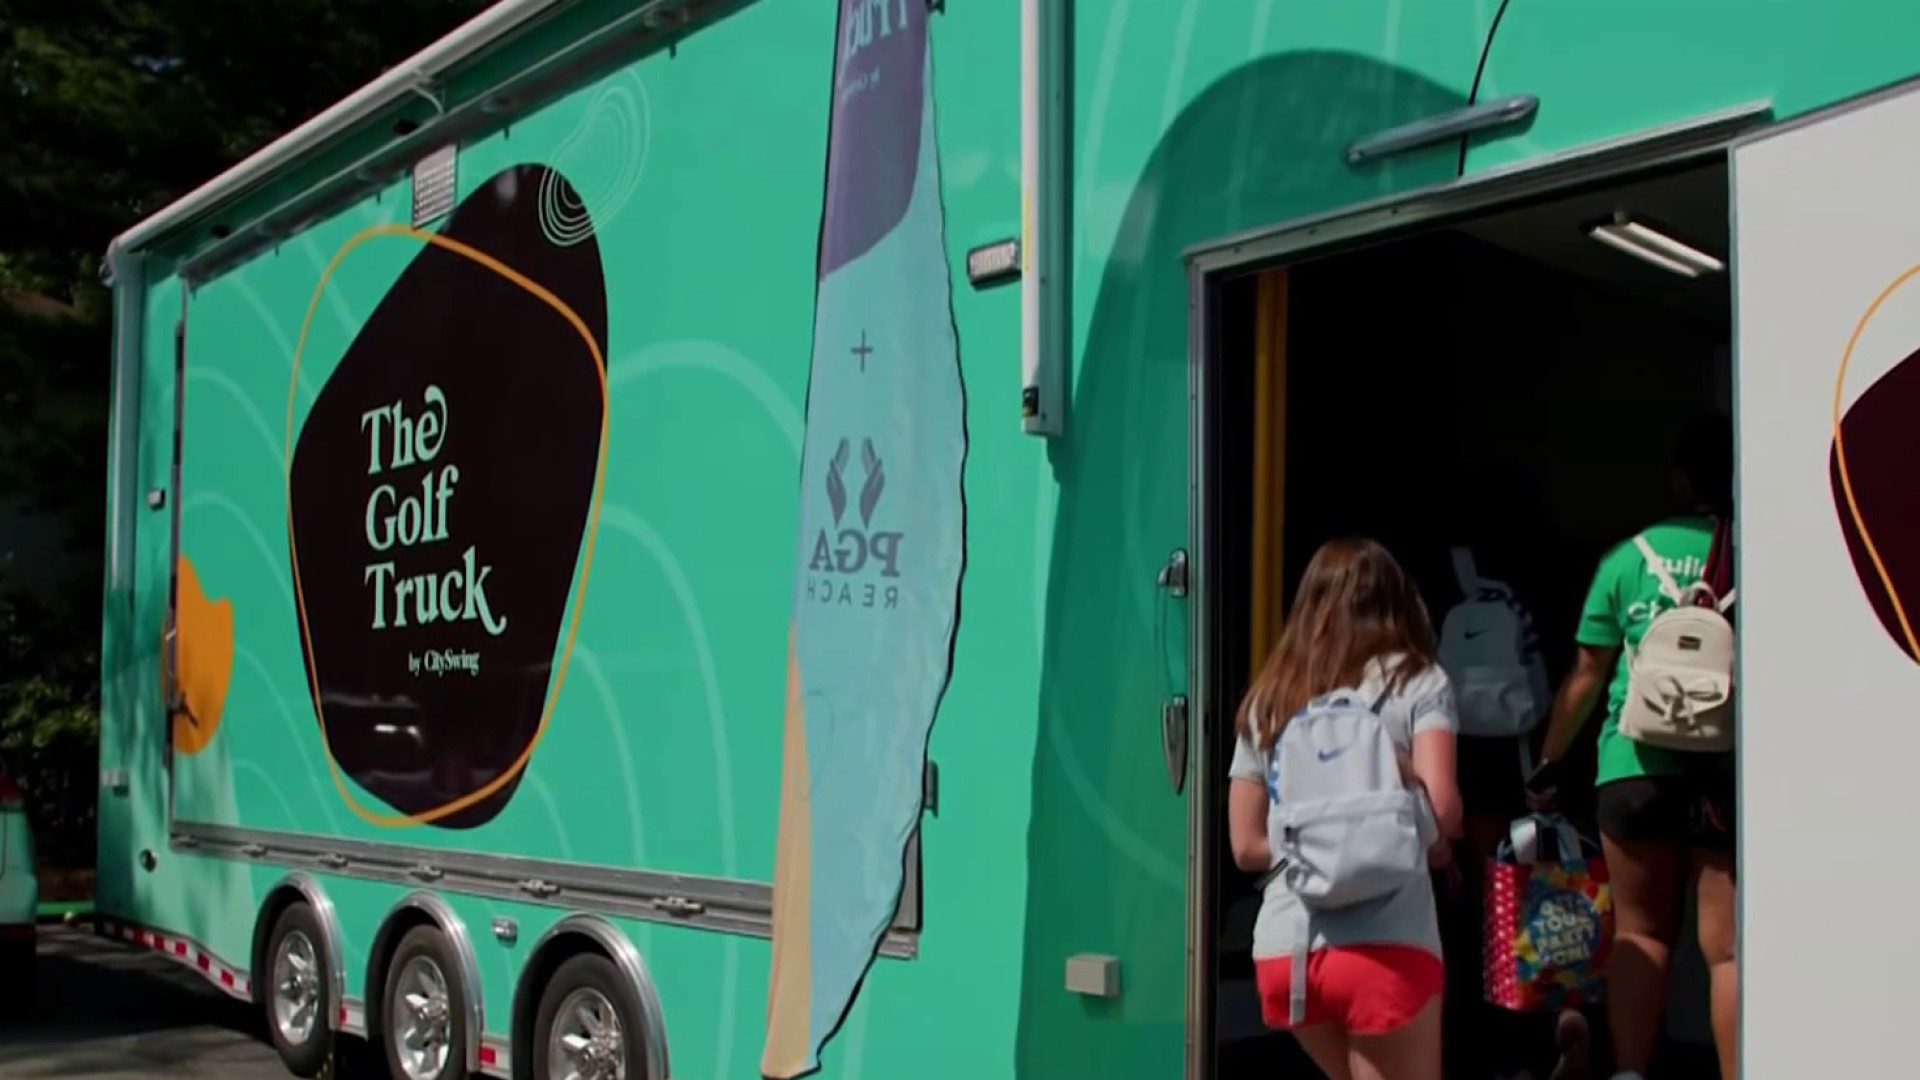 City Swings Golf Truck Brings Lessons to the Community pic